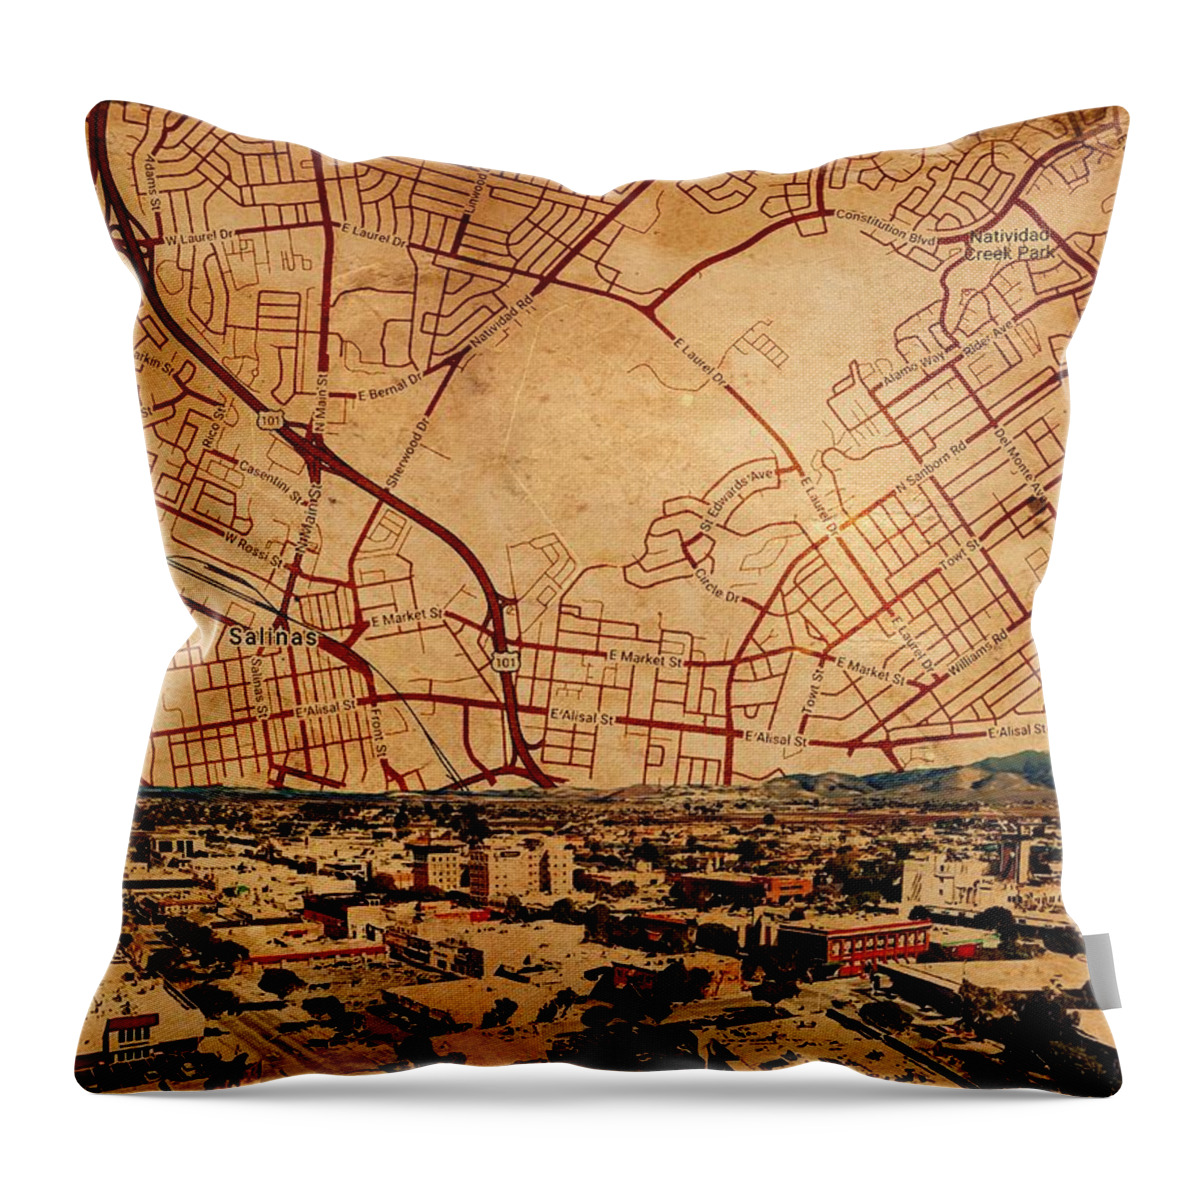 Salinas Throw Pillow featuring the digital art Salinas, California - panorama and map of the central part by Nicko Prints